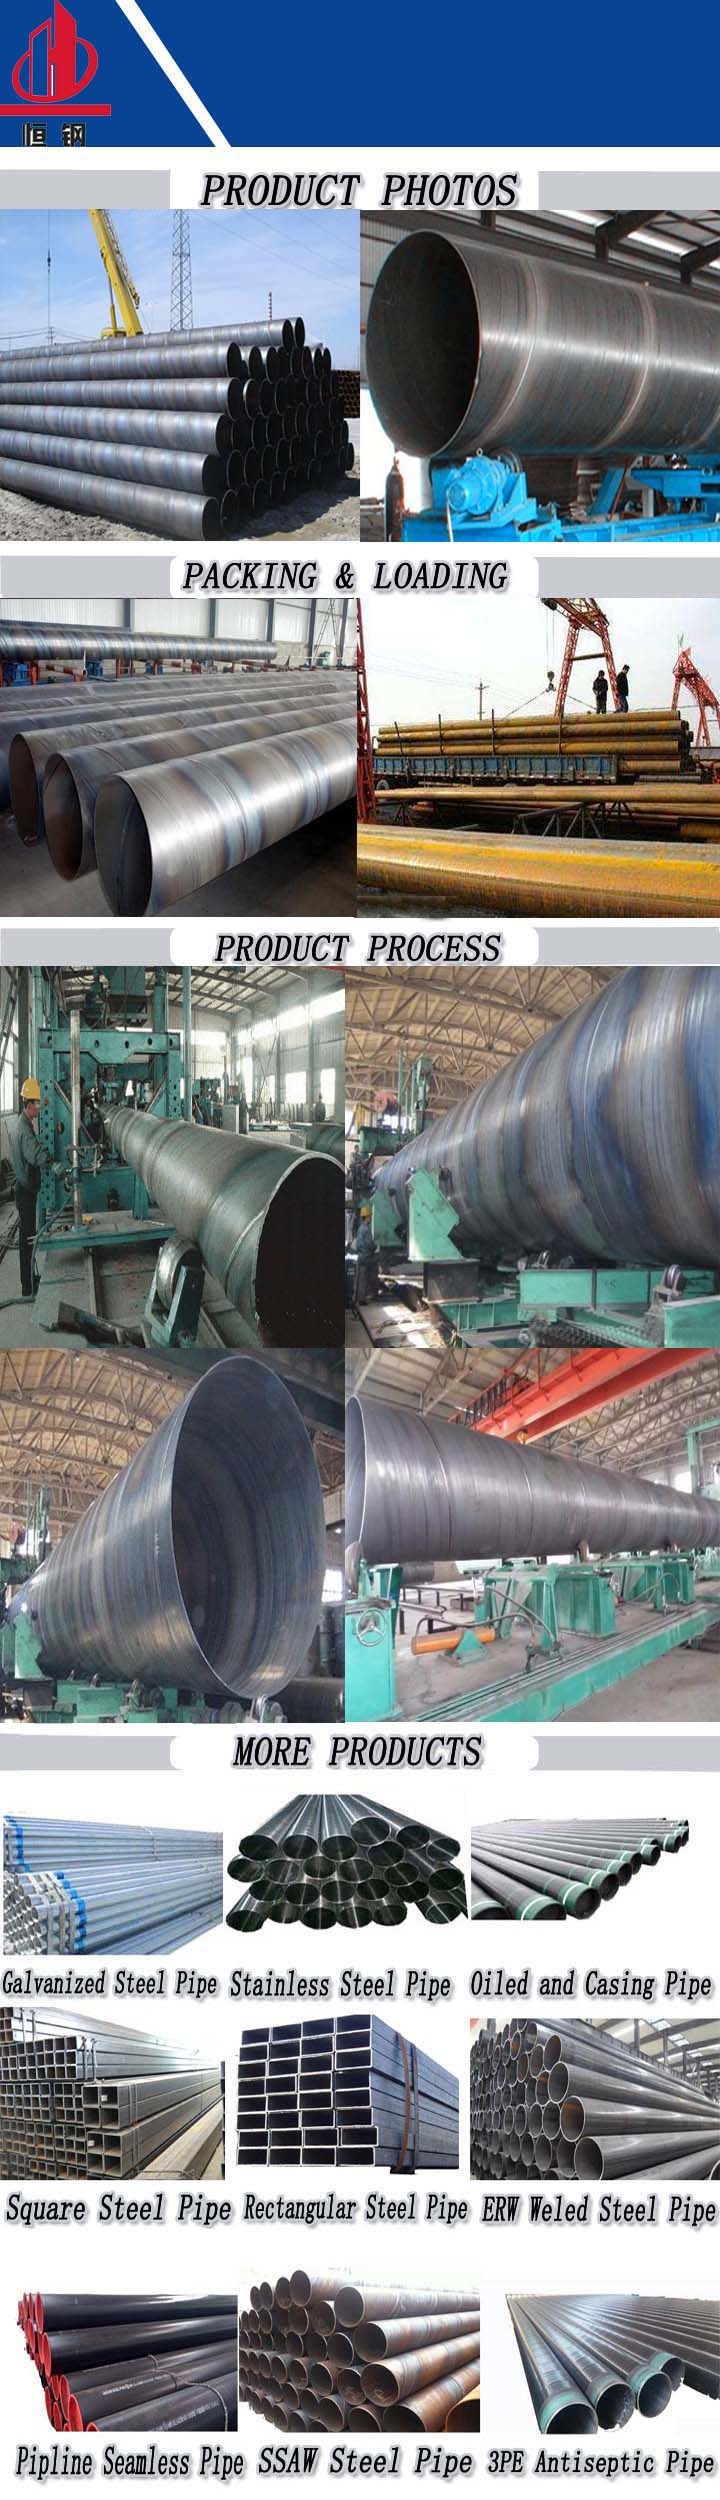 SSAW API 5L X56 Carbon Steel Pipe Spiral Welded Steel Pipe